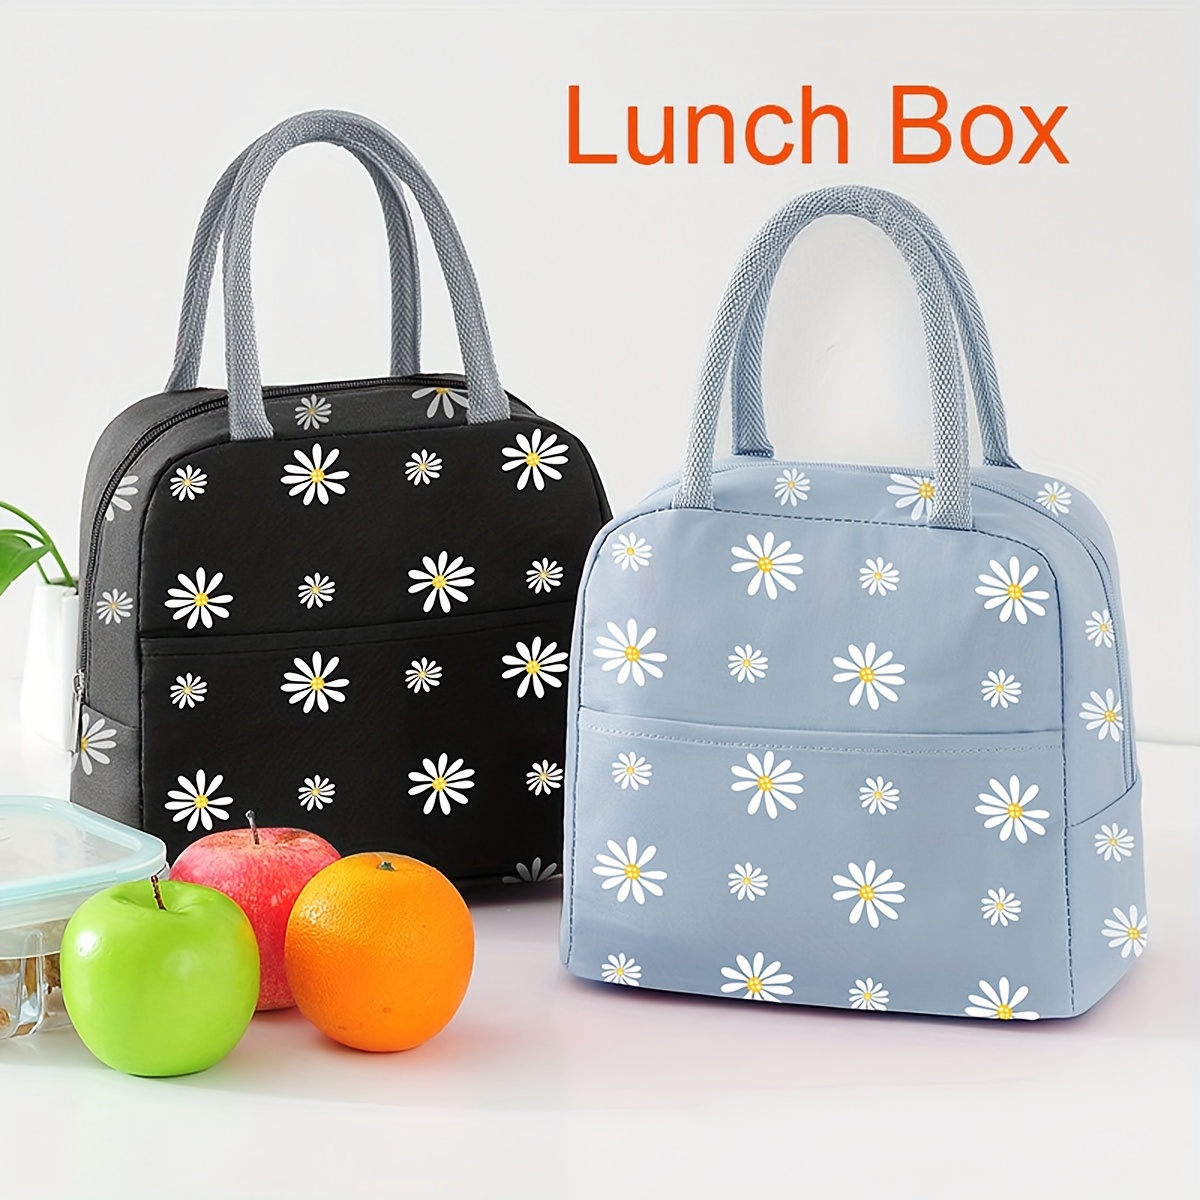 

Daisy-themed Insulated Lunch Bag - Waterproof, Large Capacity For School, Office, Camping & Picnics - Durable Polyester, Hand Washable Ideal For Busy Professionals - Stylish And Practical